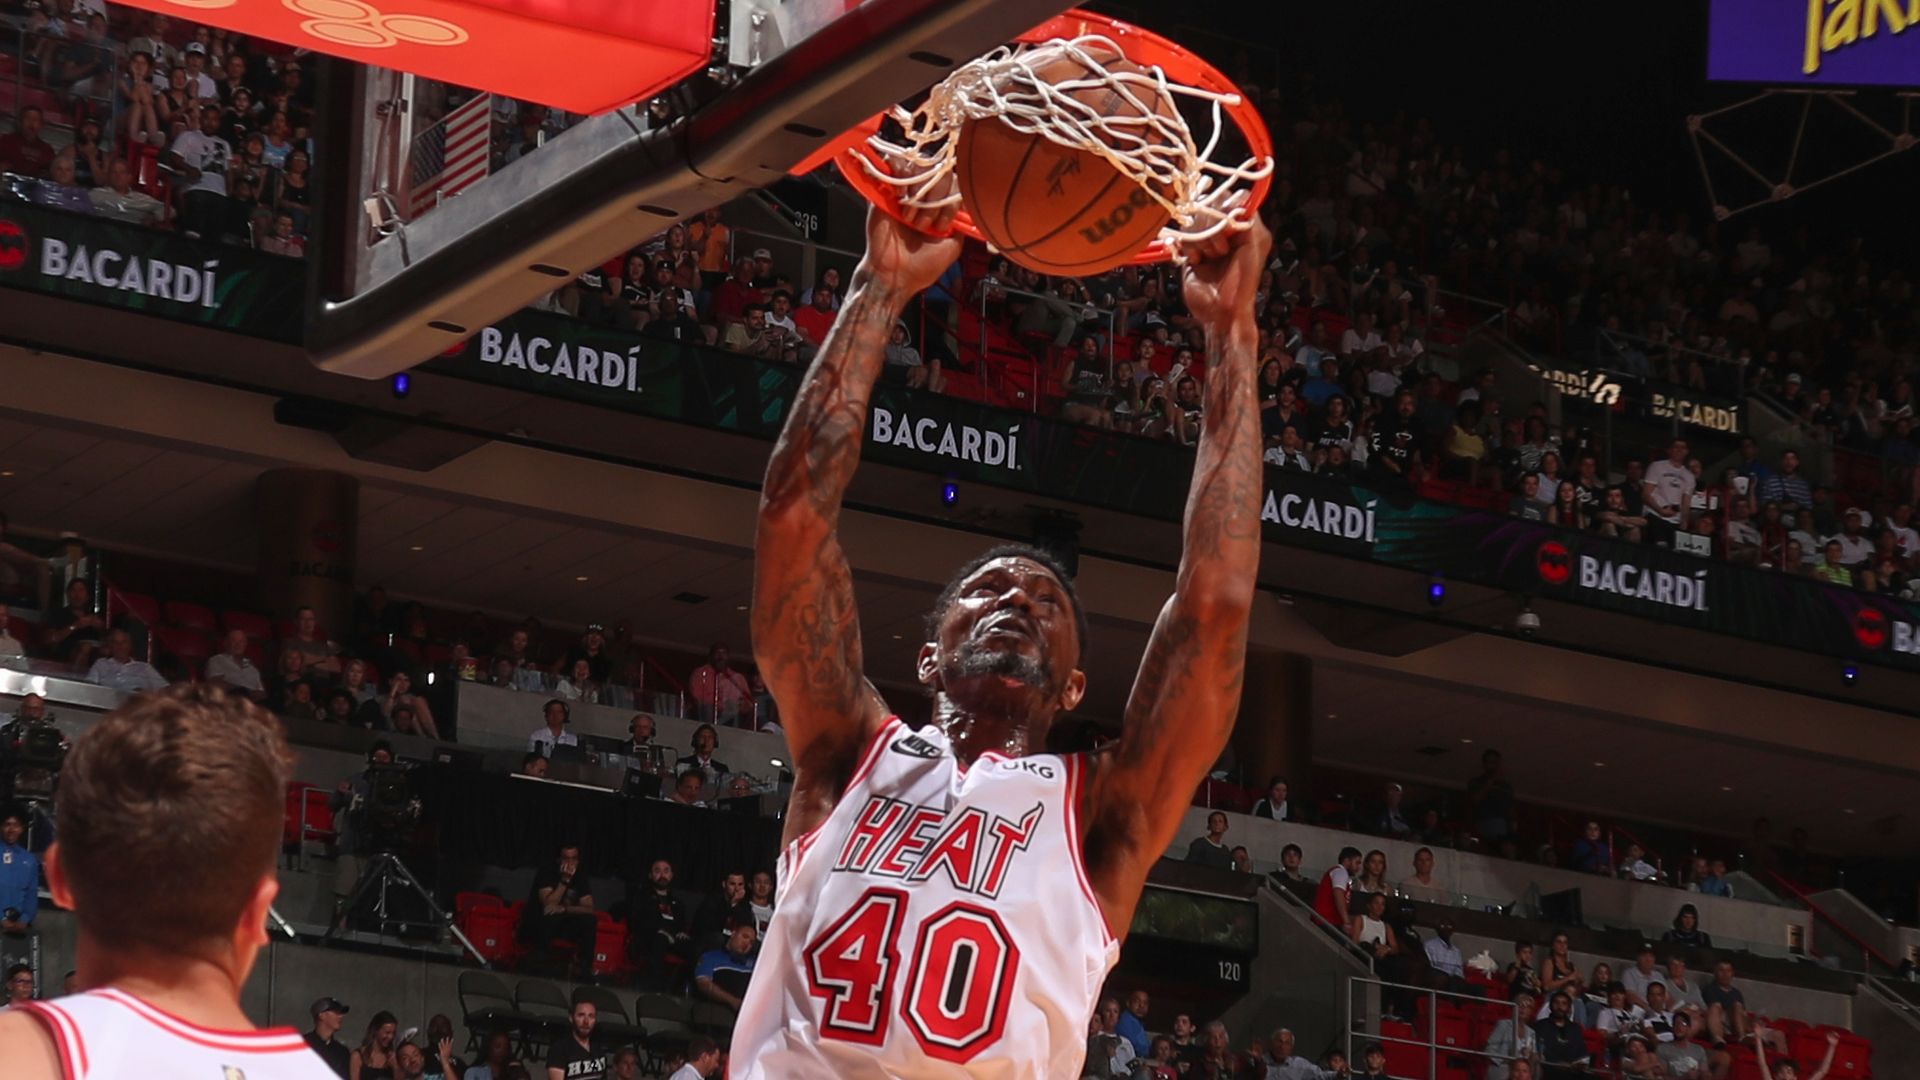 Miami Heat player Udonis Haslem dunks.